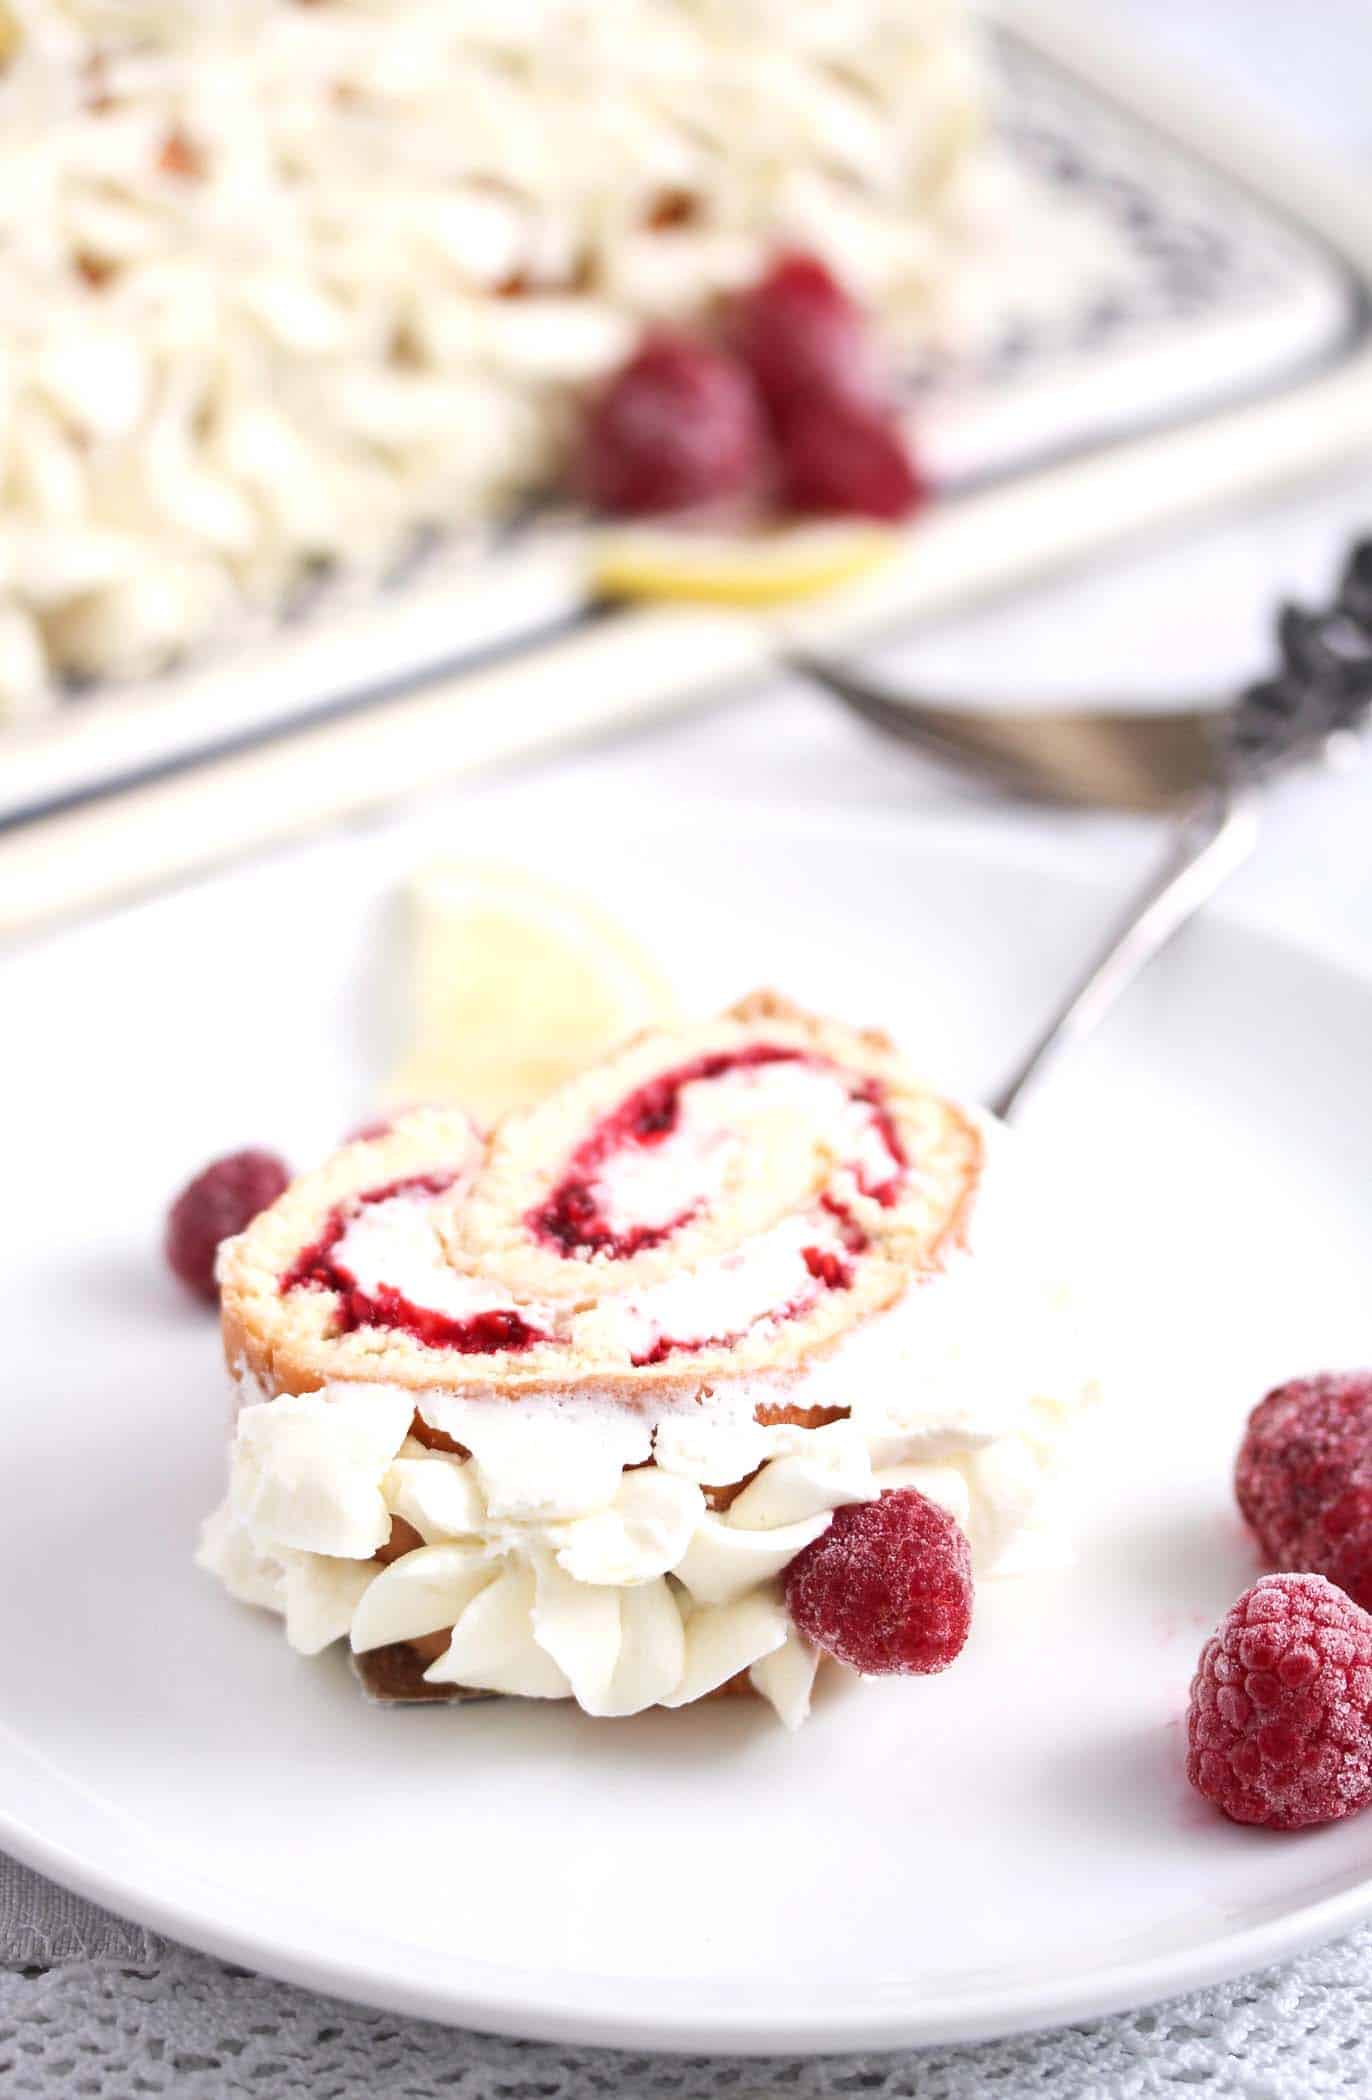 sliced cream roll with raspberries and cream on a plate.